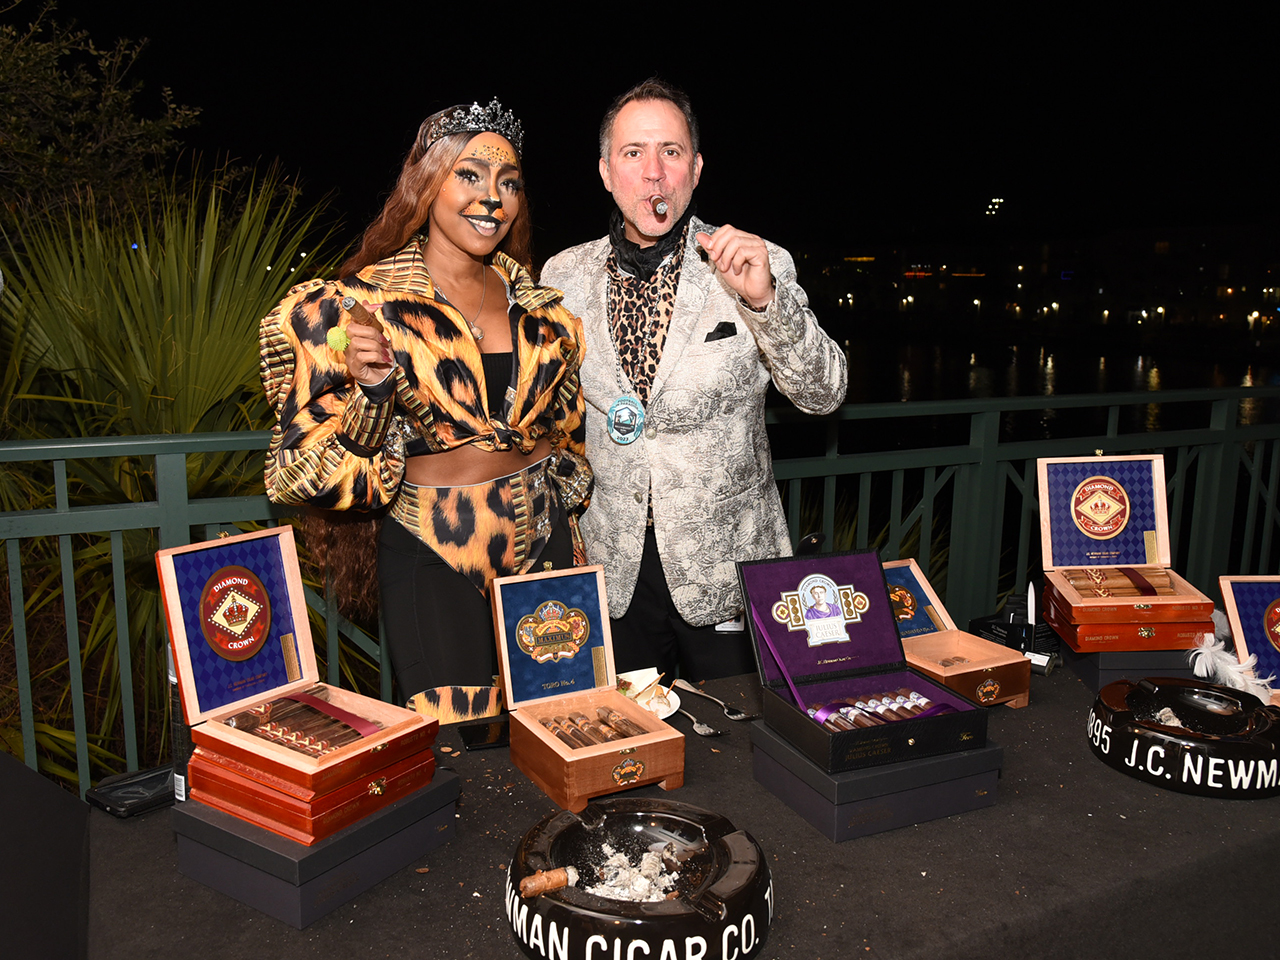 The Gala event featured a Cigar Bar sponsored by J.C. Newman